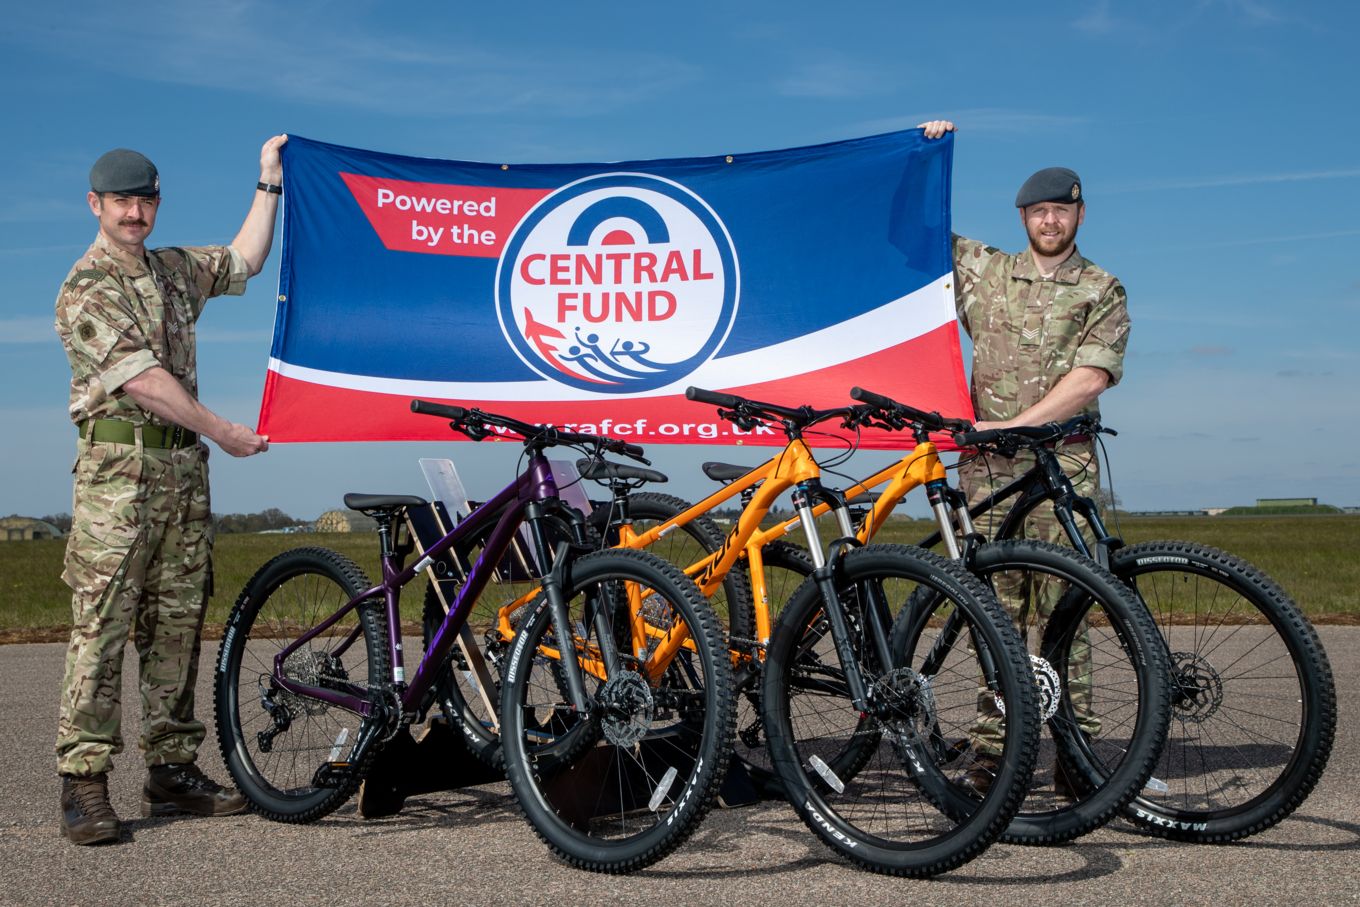 RAF honnington personnel pose for photo with RAF Central Fund flag